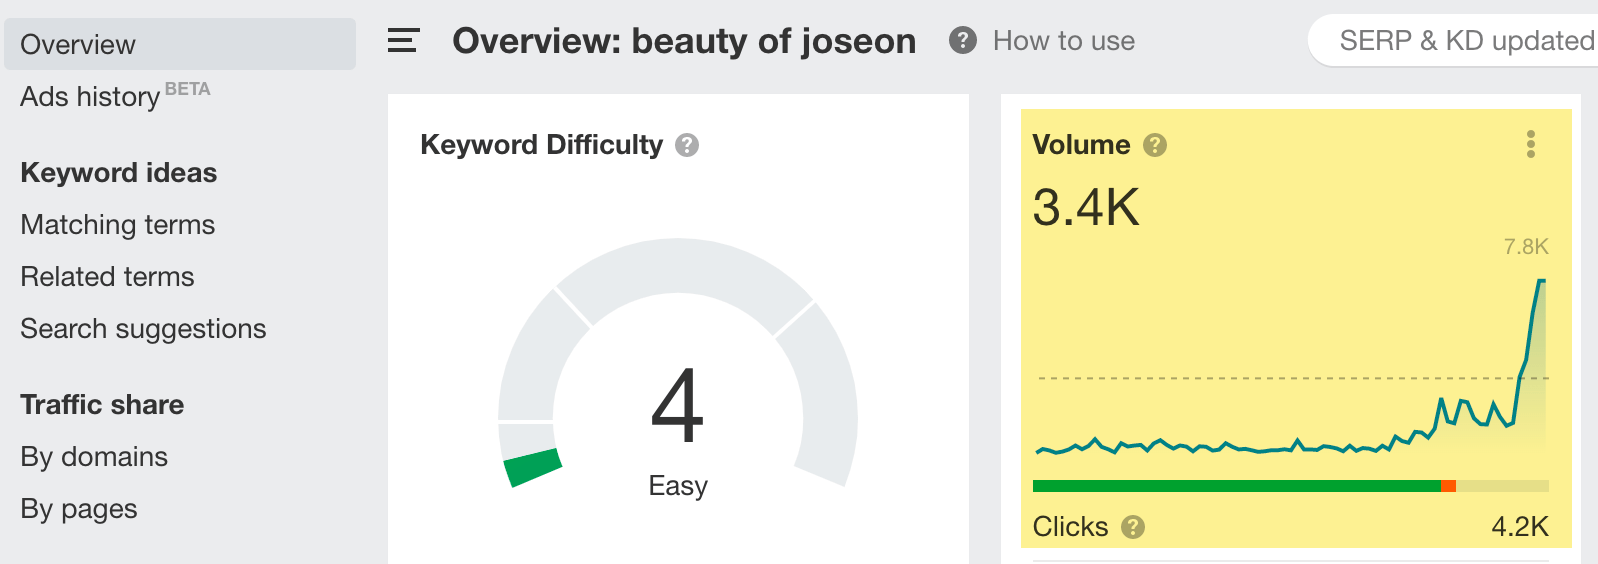 Keyword Explorer Review for "the beauty of joseon" 